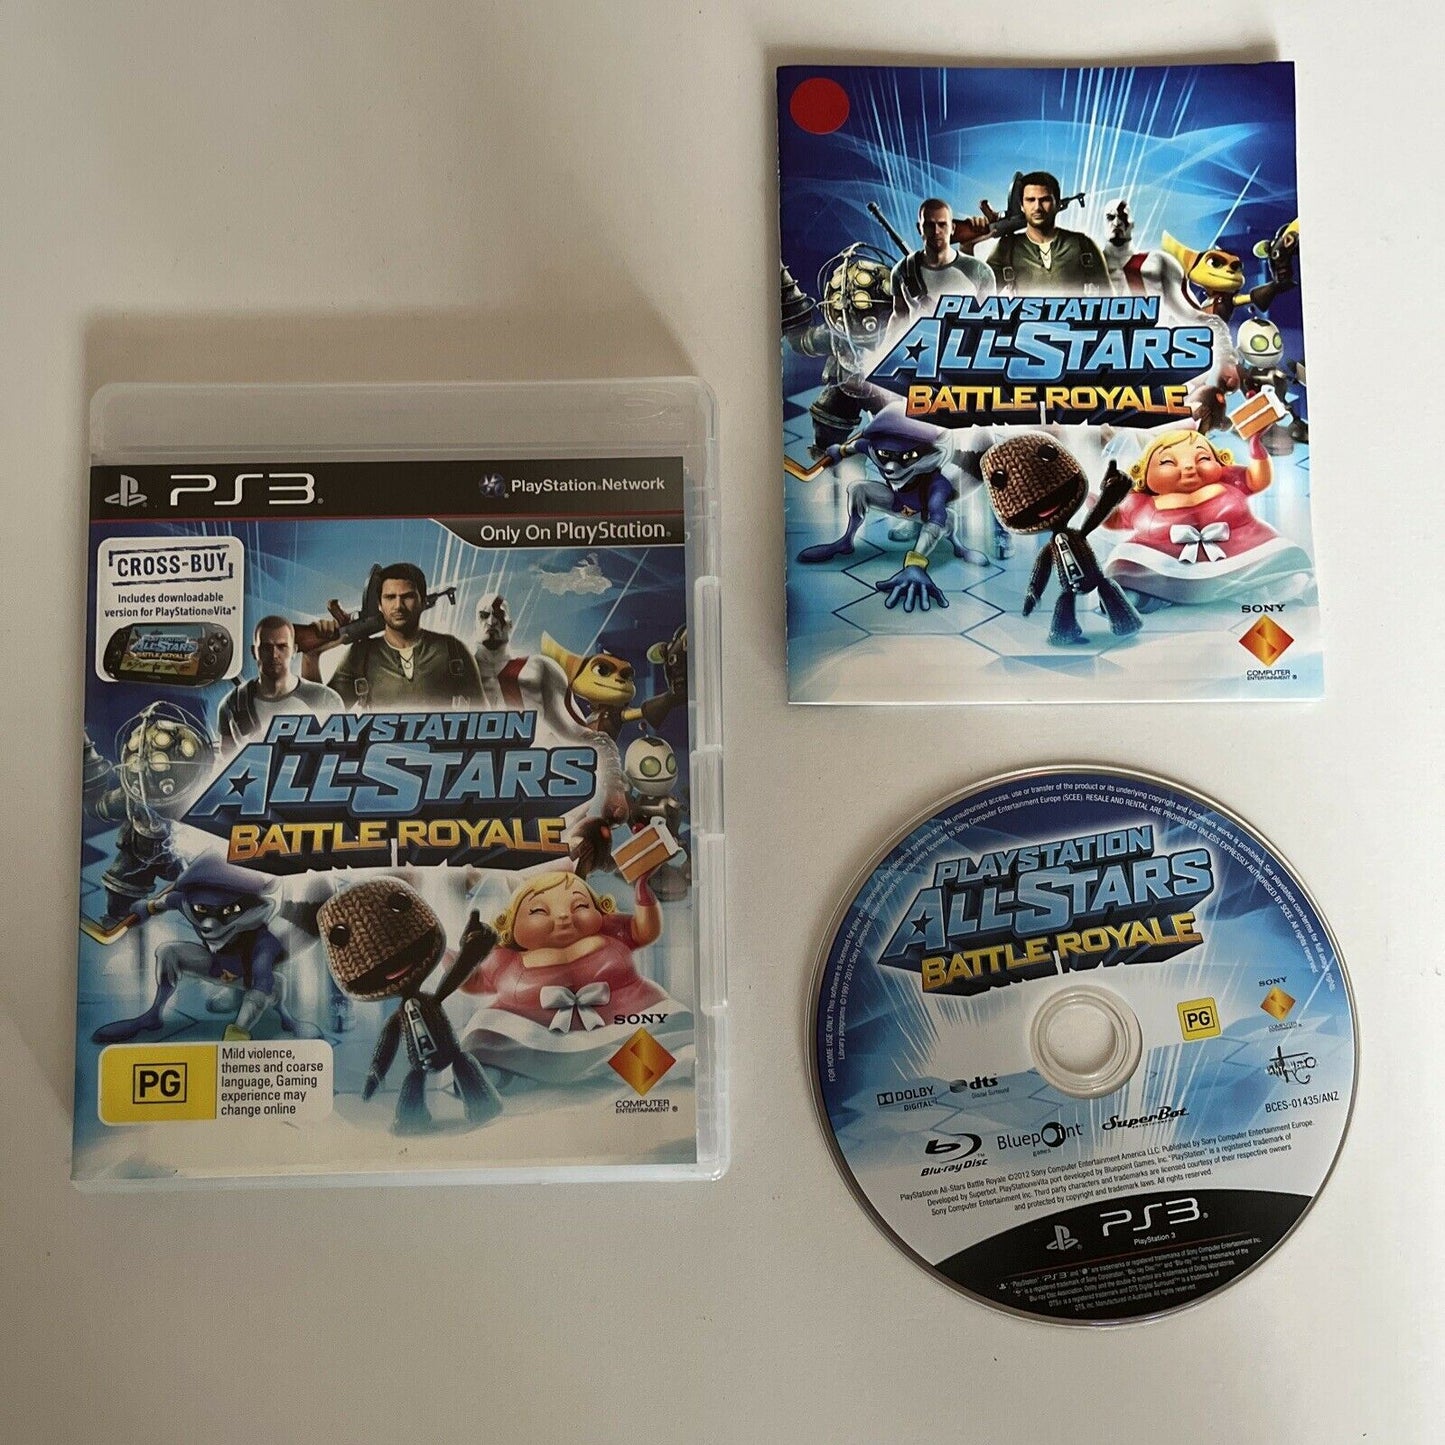 Playstation All-Stars Battle Royal for Playstation 3 PS3